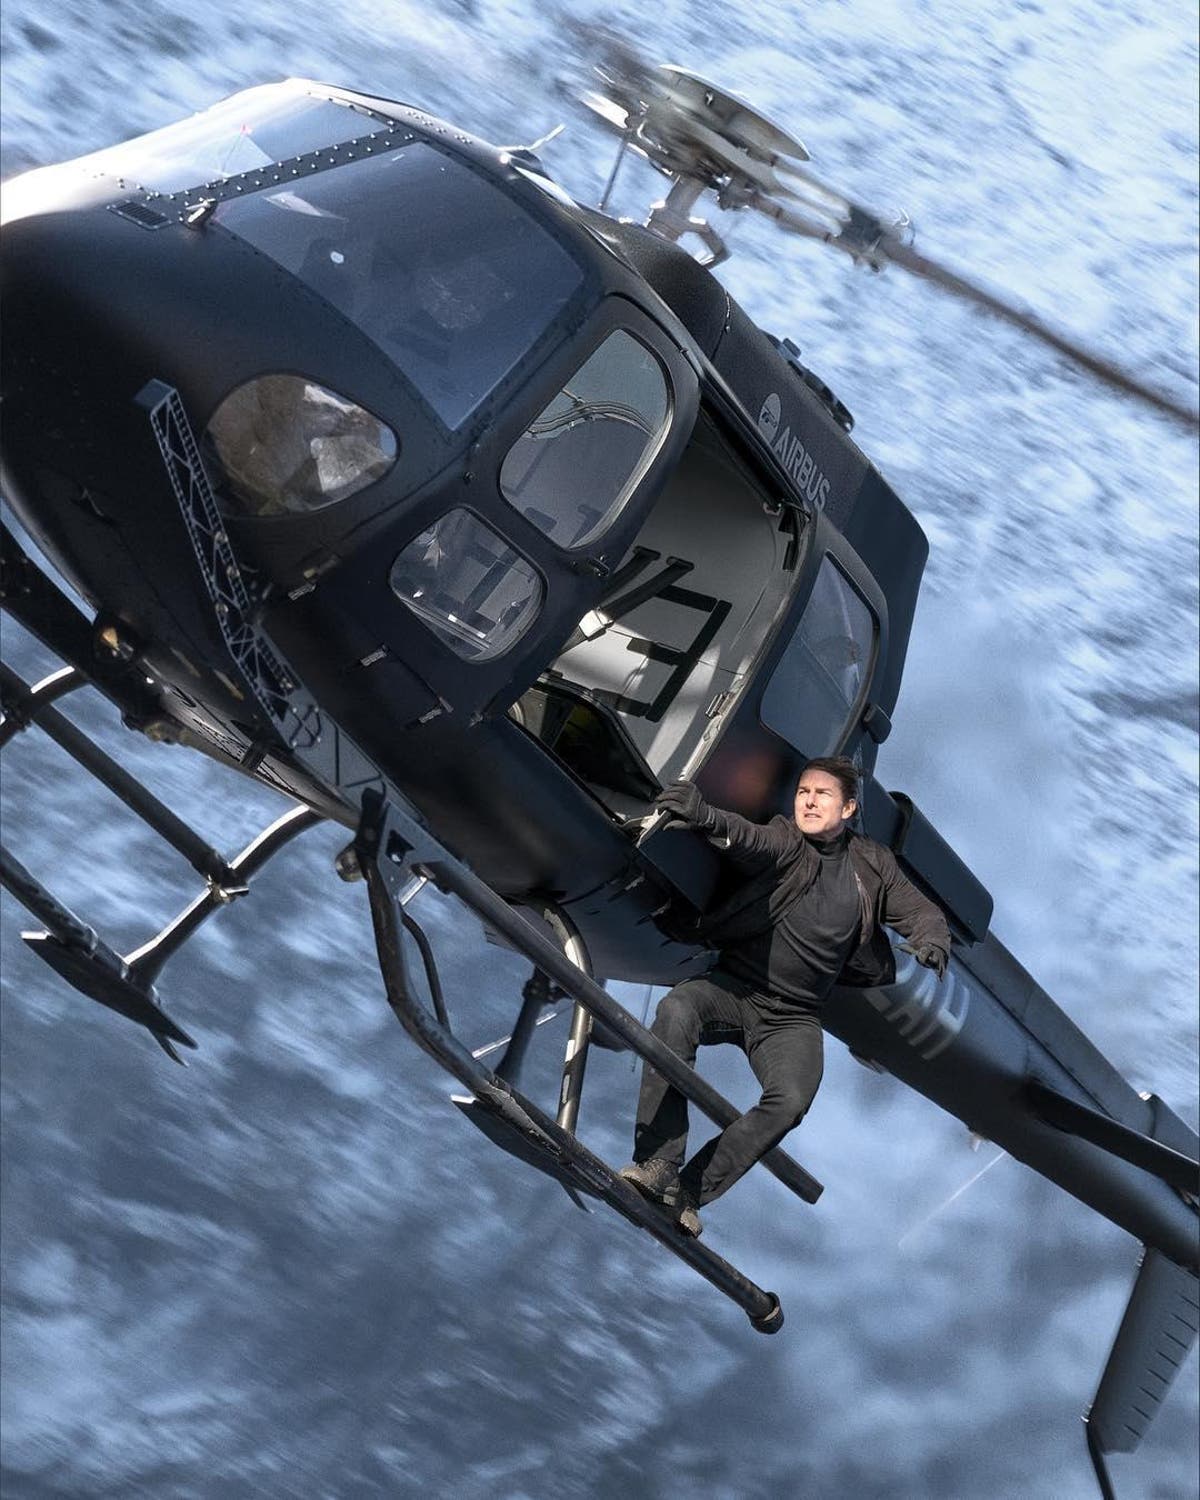 Mission Impossible 6: Fallout - Tom Cruise reveals title, release date ...